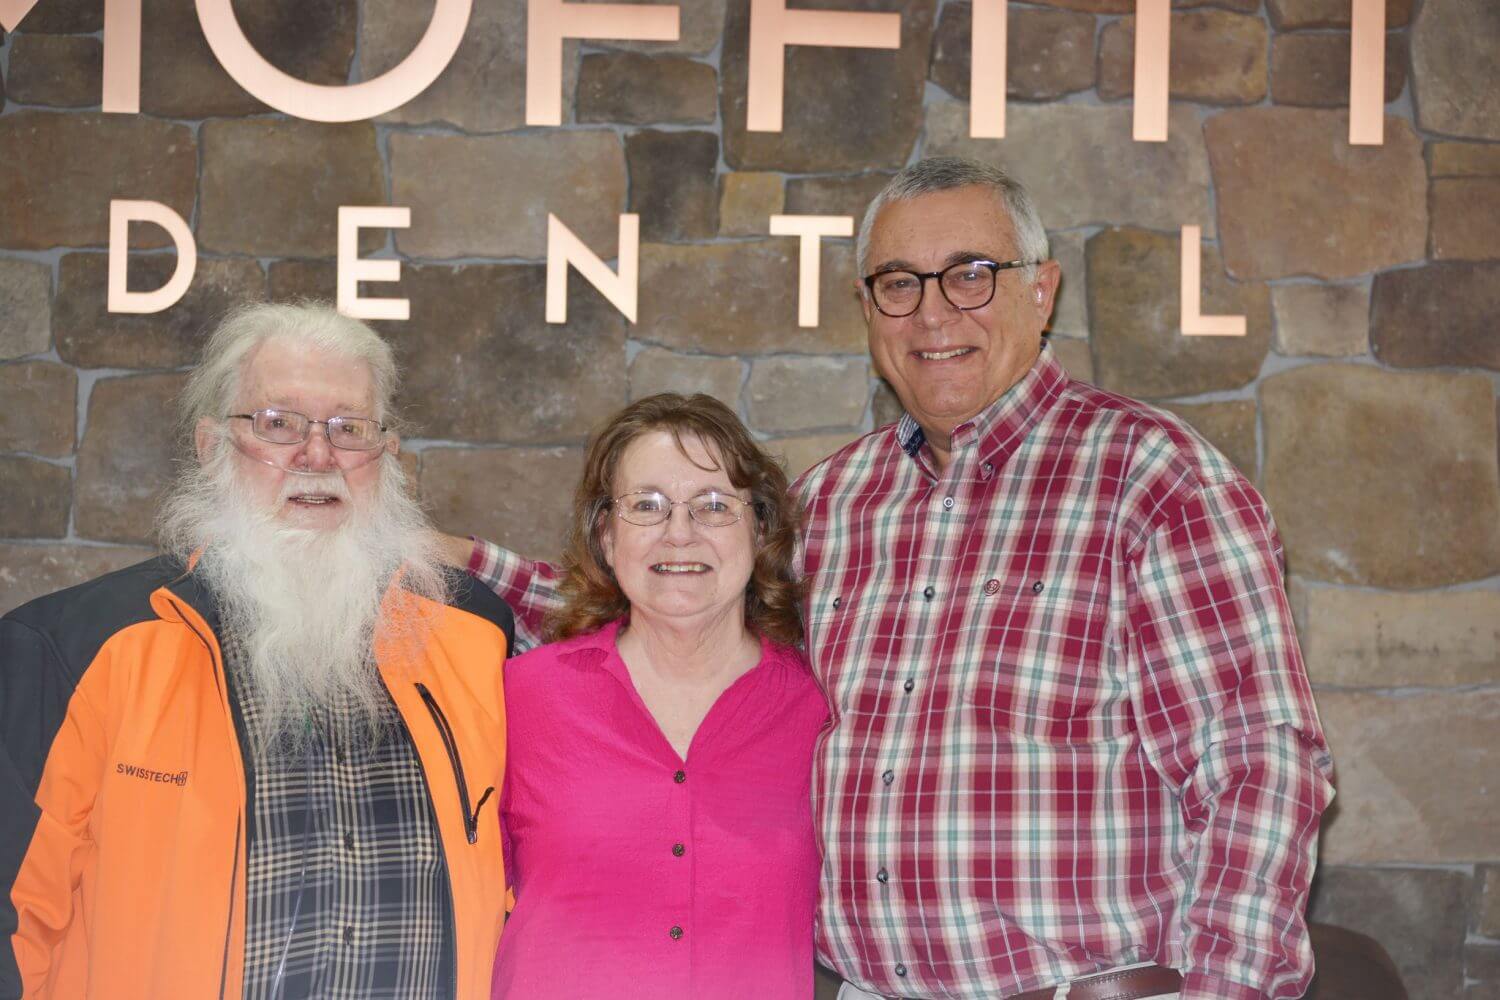 DLN Success Story – Iowa Couple Receives Generous Help from Volunteers